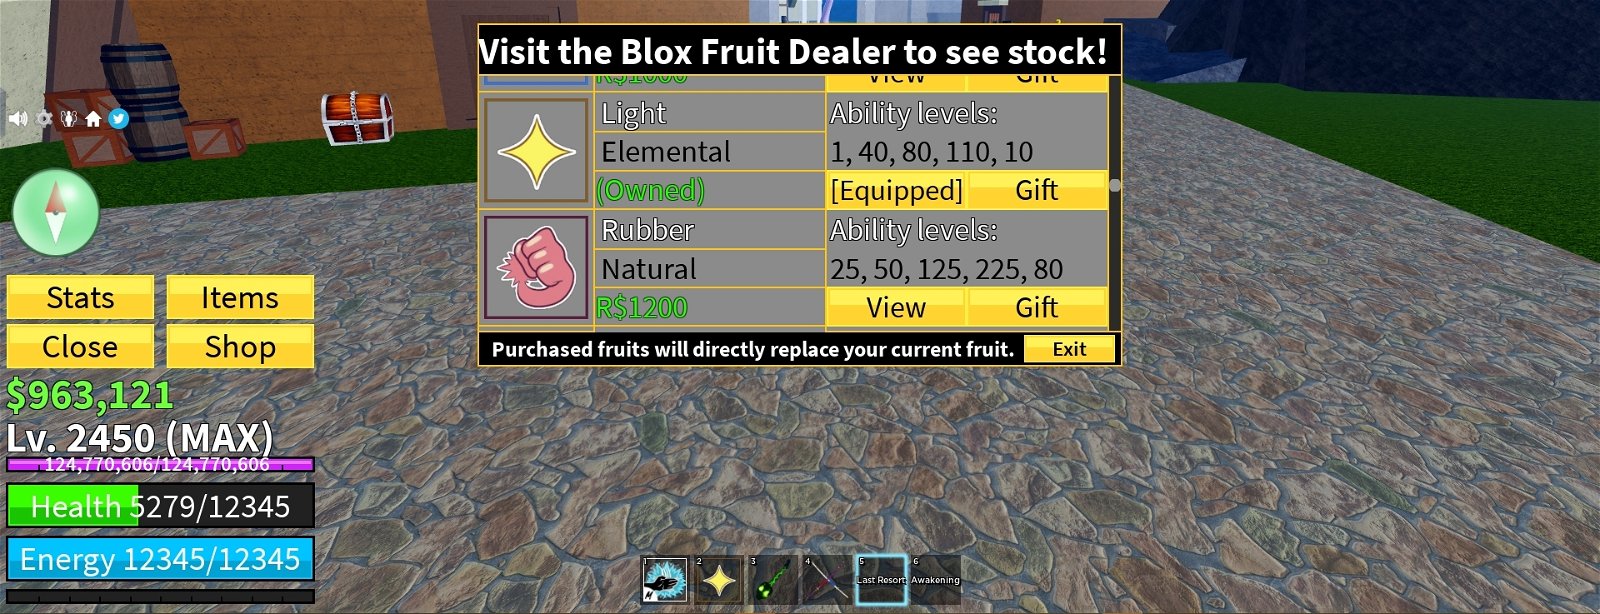 Blox Fruit : MAX Level 2450, Has Perm Ice and Light